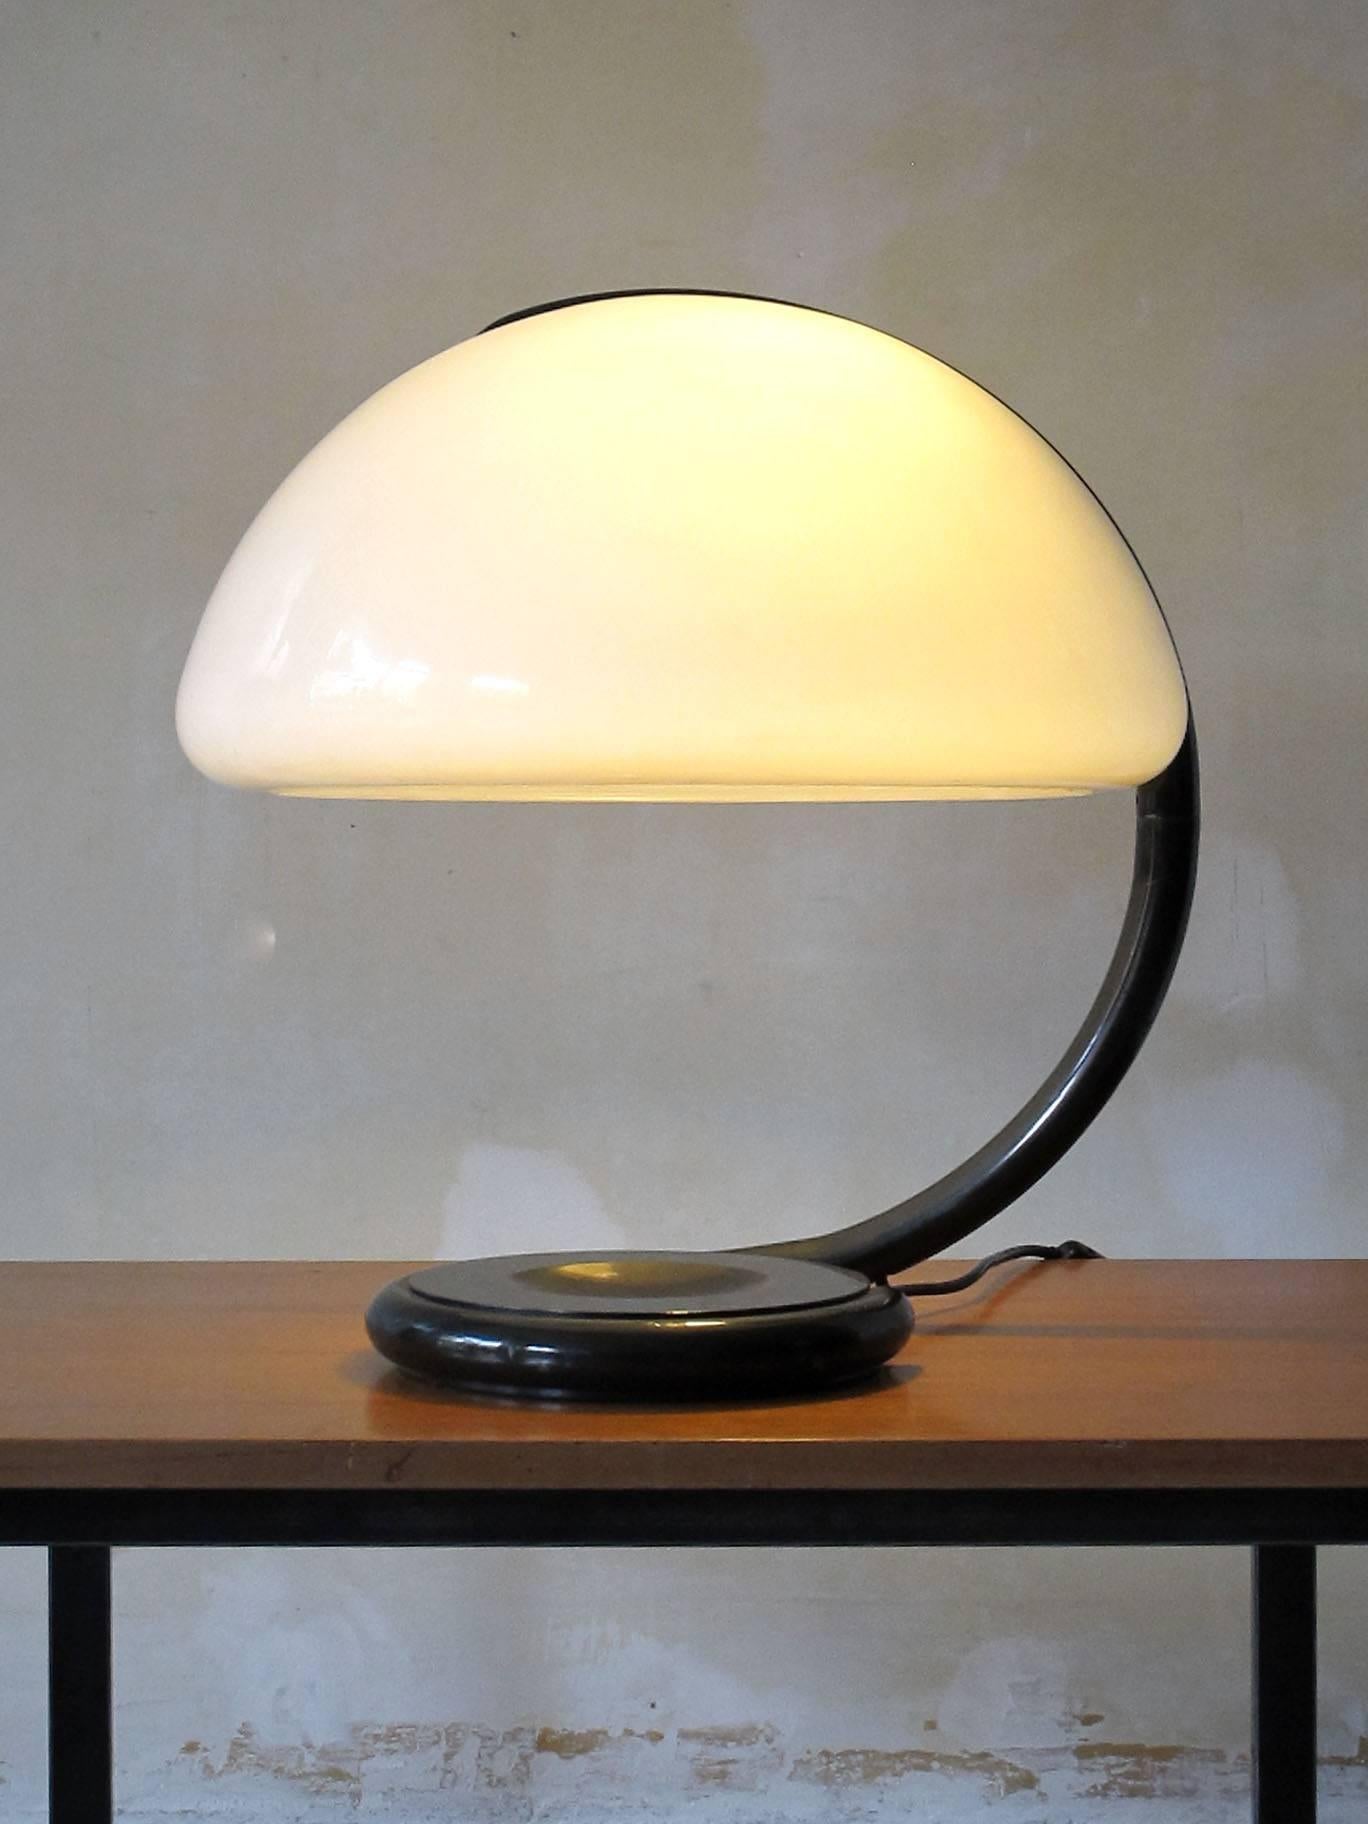 Italian table lamp model Serpente designed by Elio Martinelli and produced by Martinelli Luce Italy in 1965, with adjustable plastic diffuser and metal base.